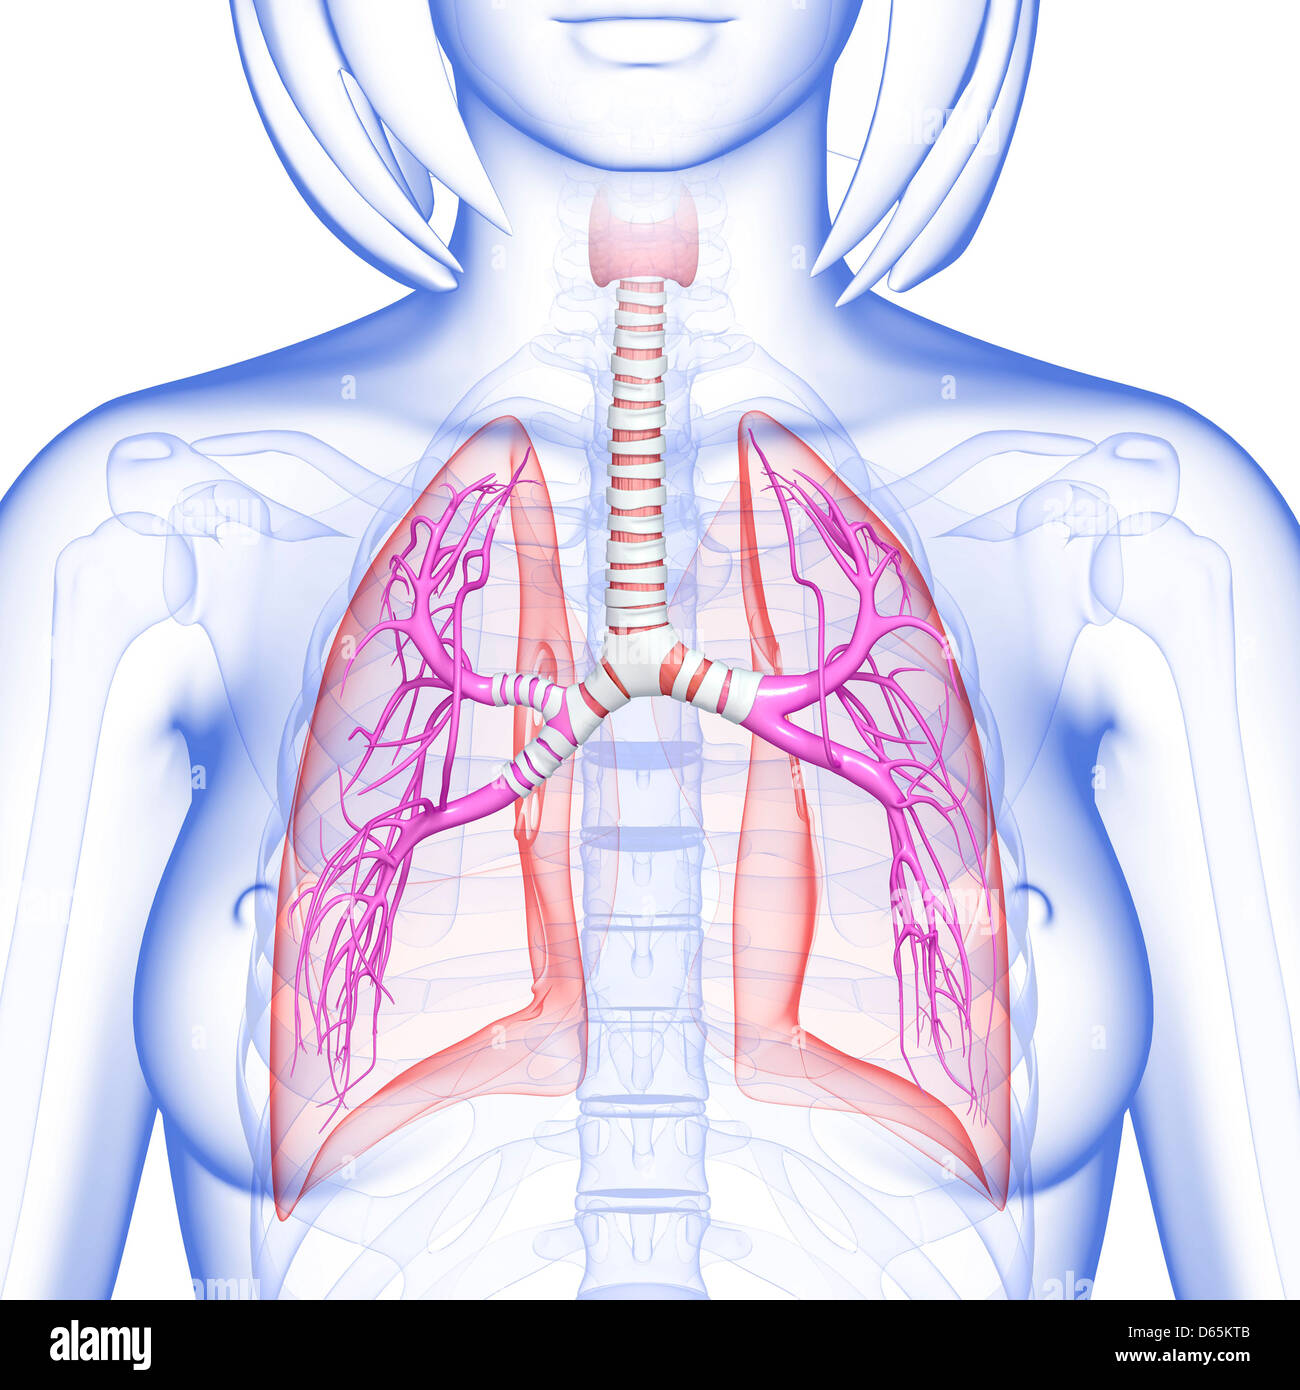 Illustration of female chest and body organs Stock Photo - Alamy